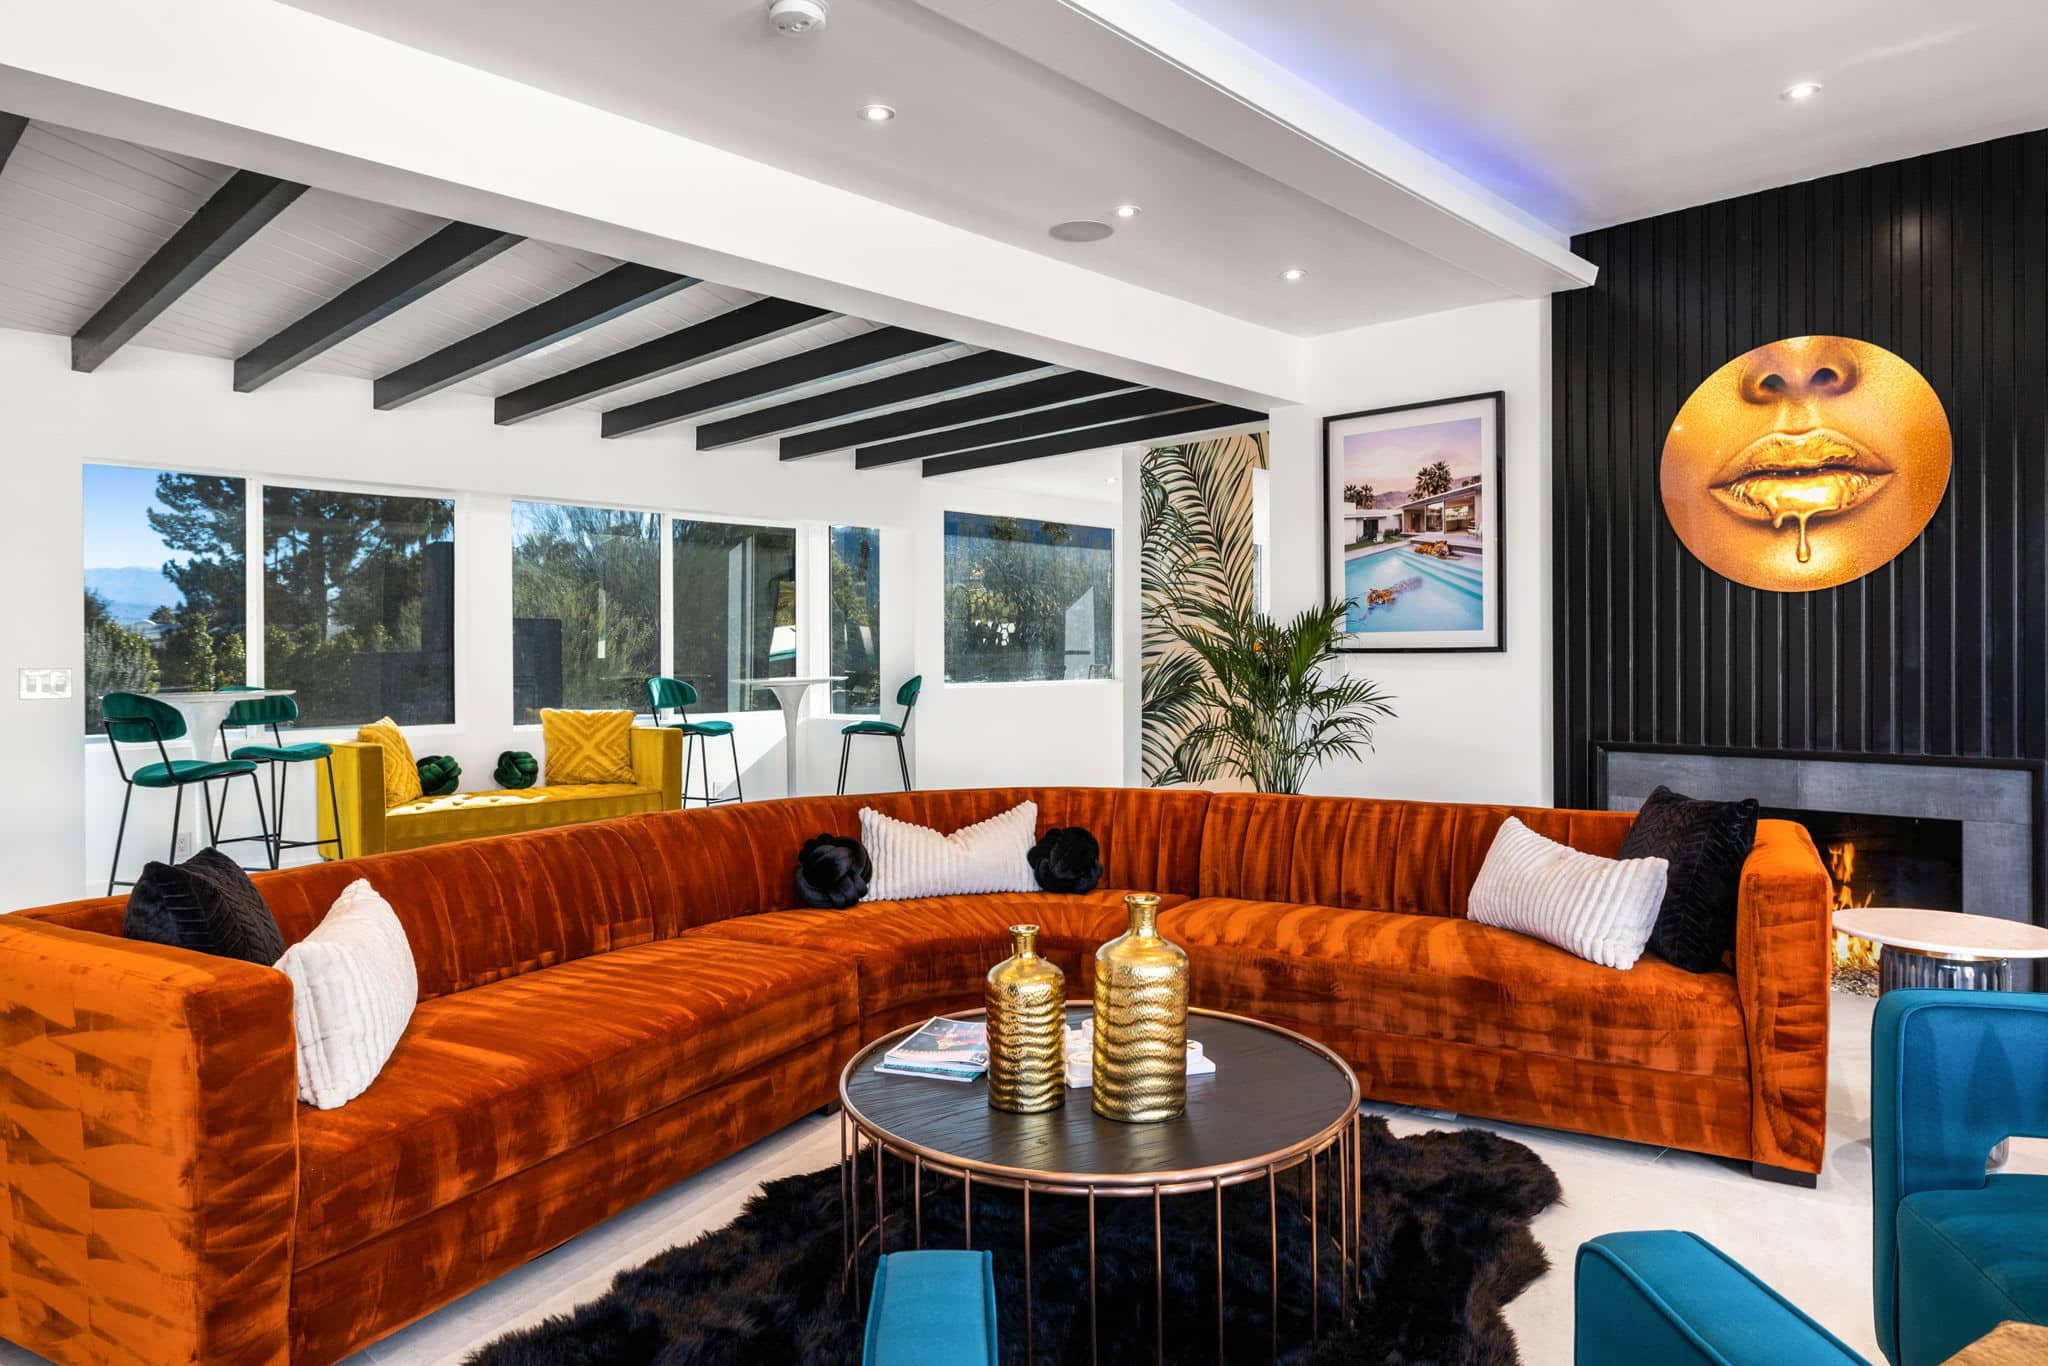 A modern living room with a large orange velvet sectional sofa, contrasting black and white throw pillows, a circular coffee table with golden vases, and a fireplace. The décor includes a dark paneled wall with a round golden artwork depicting lips, colorful chairs at a bar area by the window, and vibrant plants and framed artwork. The room features white walls with exposed gray beams on the ceiling and ample natural light.